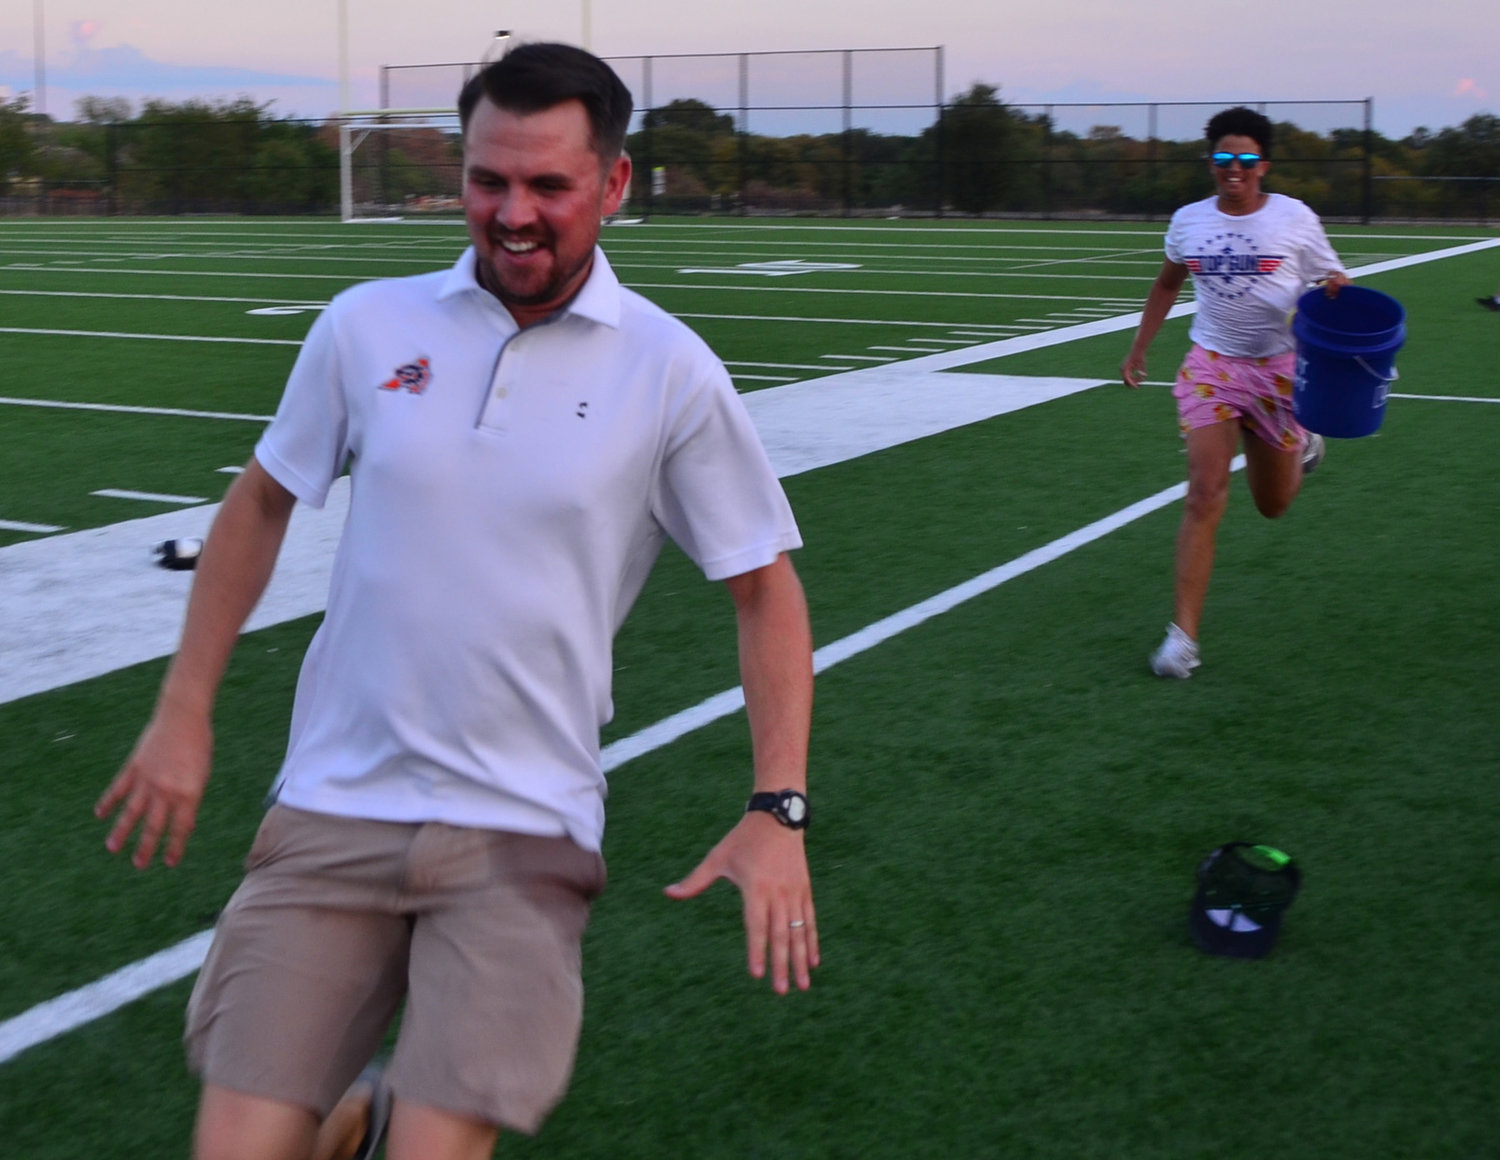 Band director Dexx Moore showed his speed on the turf by narrowly escaping a bucket of water but was later fenced and drenched by a dozen band members.